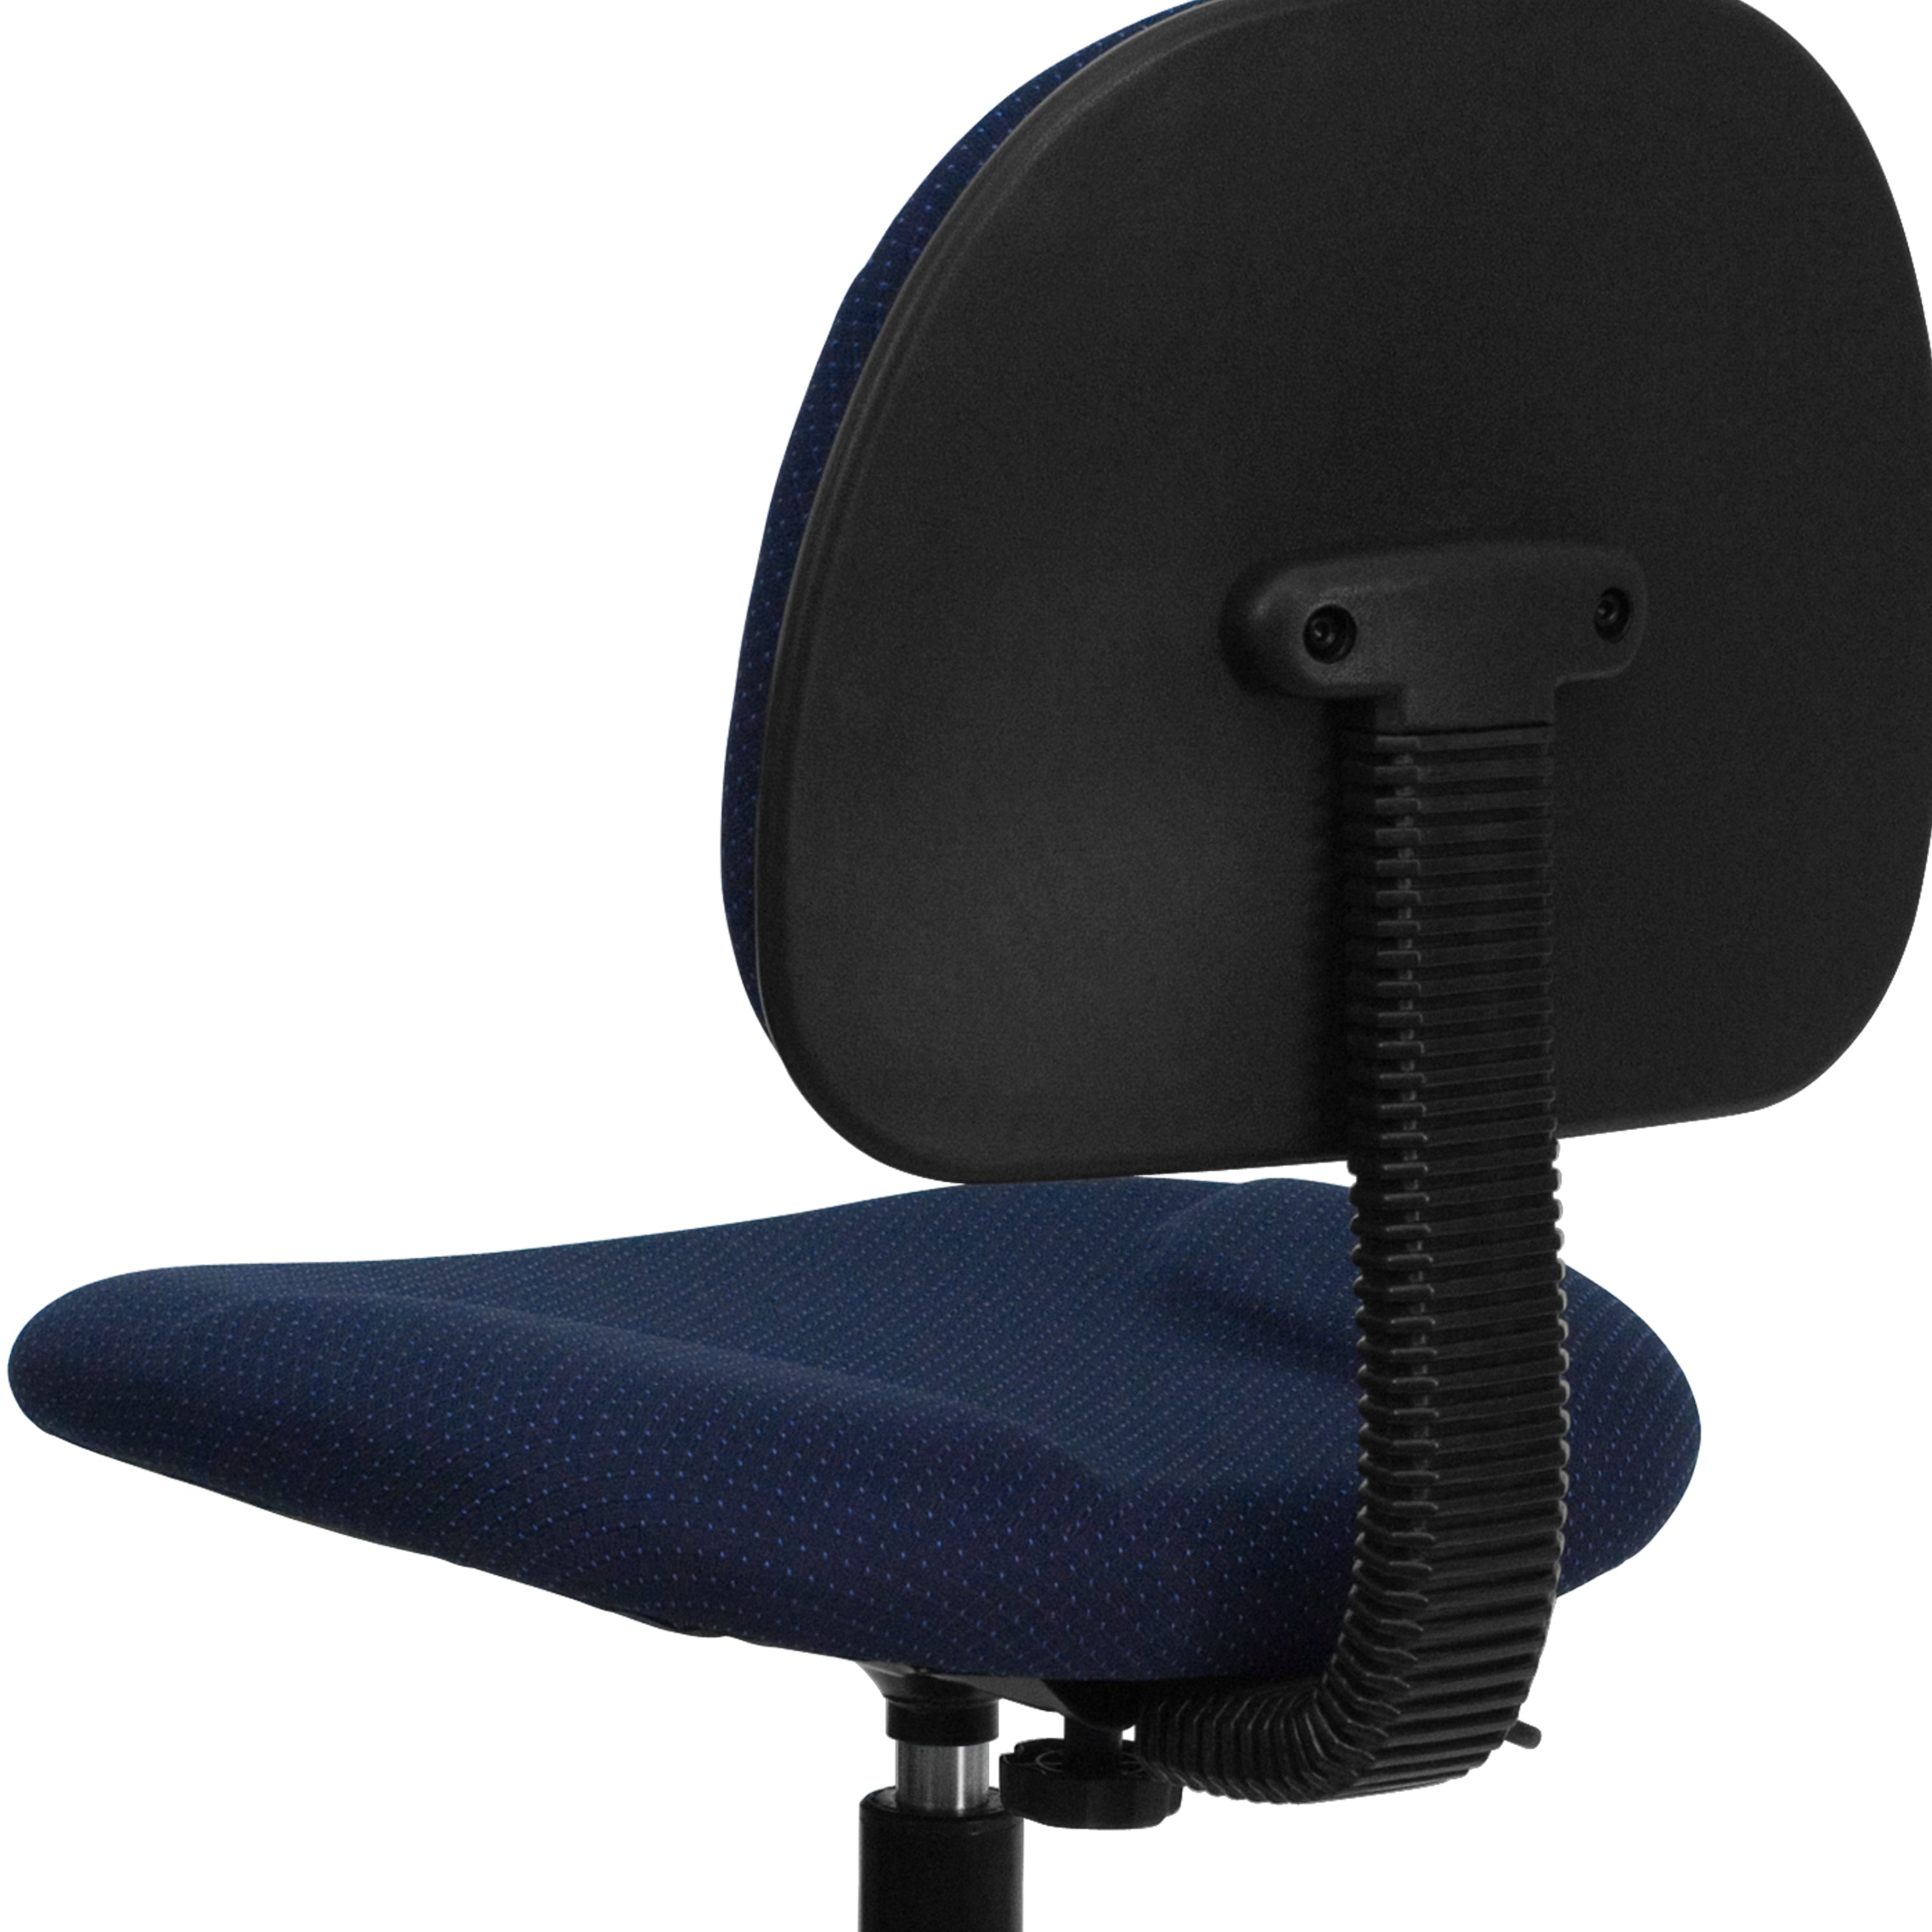 Fabric Drafting Chair (Cylinders: 22.5''-27''H or 26''-30.5''H)-Office Chair-Flash Furniture-Wall2Wall Furnishings